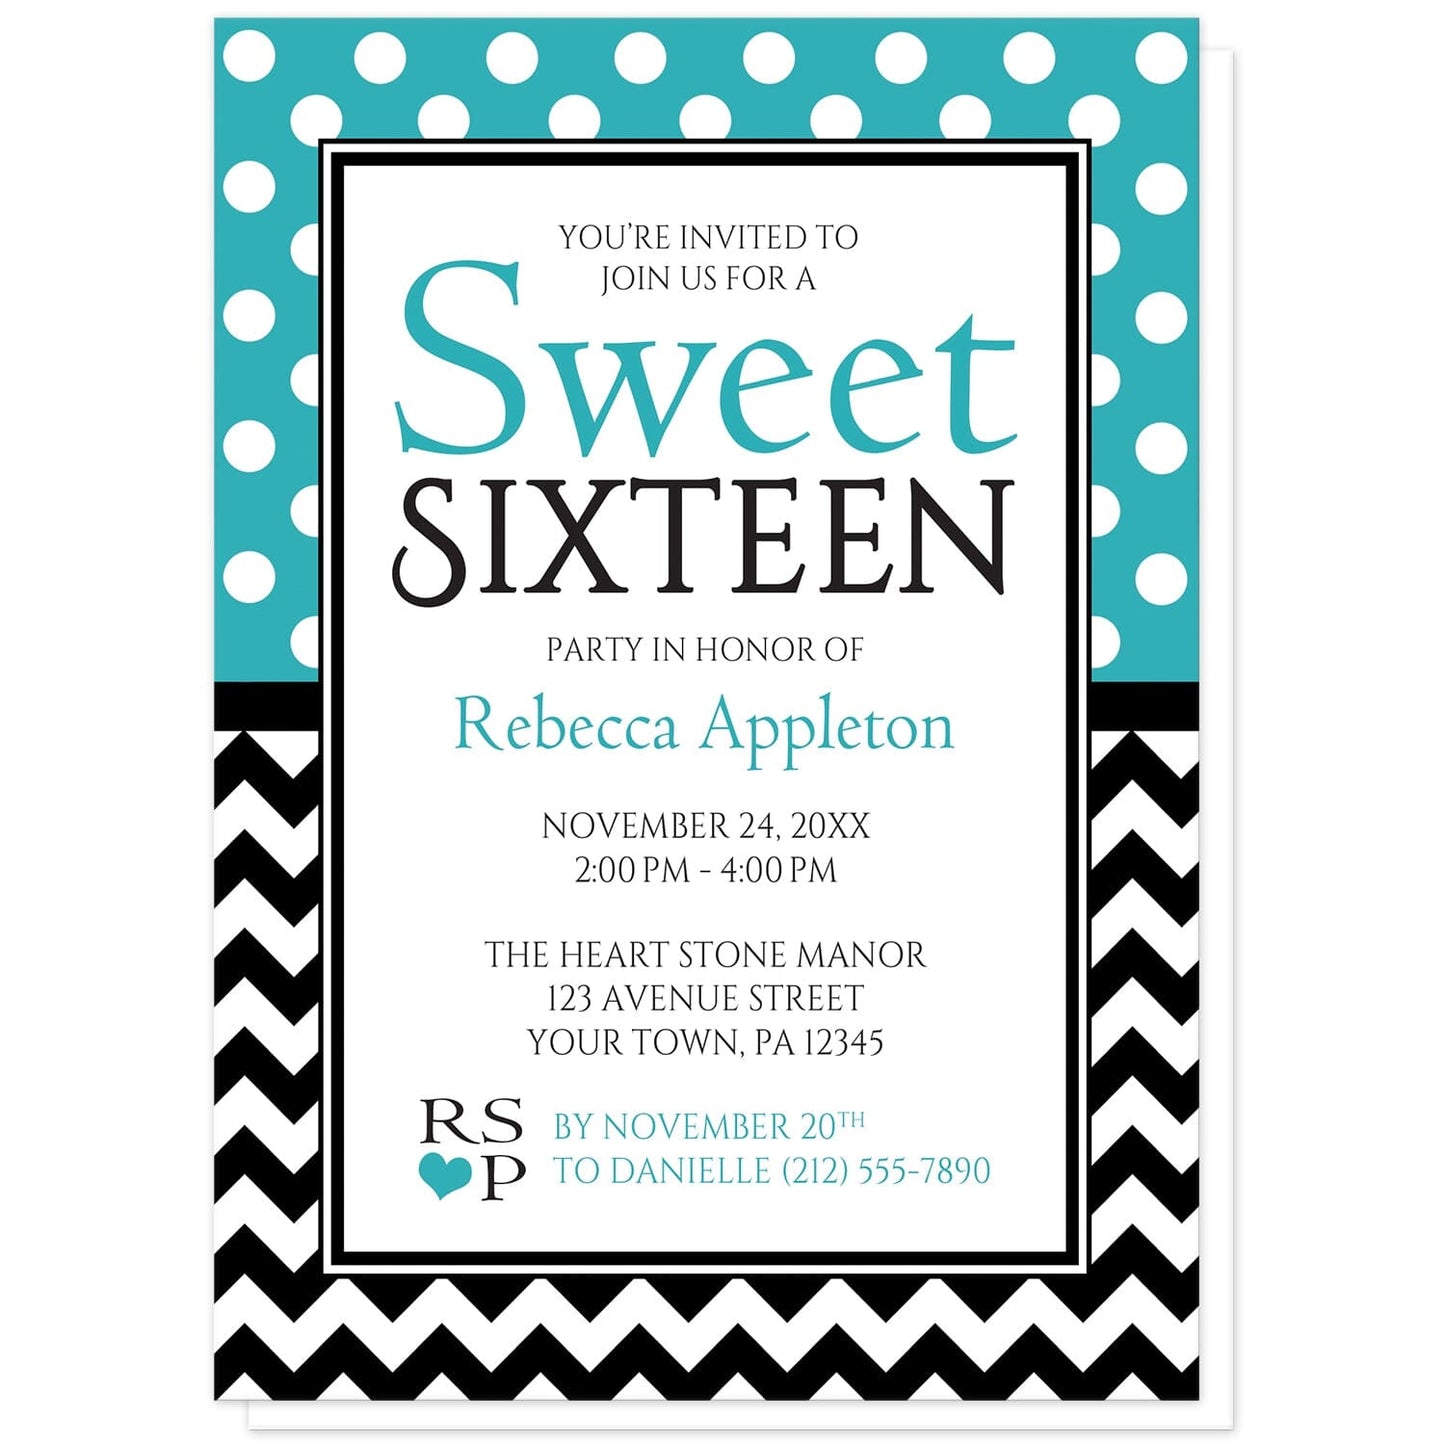 Polka Dot and Chevron Sweet 16 Invitations in Turquoise at Artistically Invited. Stylish patterned polka dot and chevron sweet 16 Invitations with white polka dots over turquoise on the top half and a black and white chevron zigzag pattern on the bottom half.  Your personalized sweet sixteen birthday party details are custom printed in turquoise and black in the center.